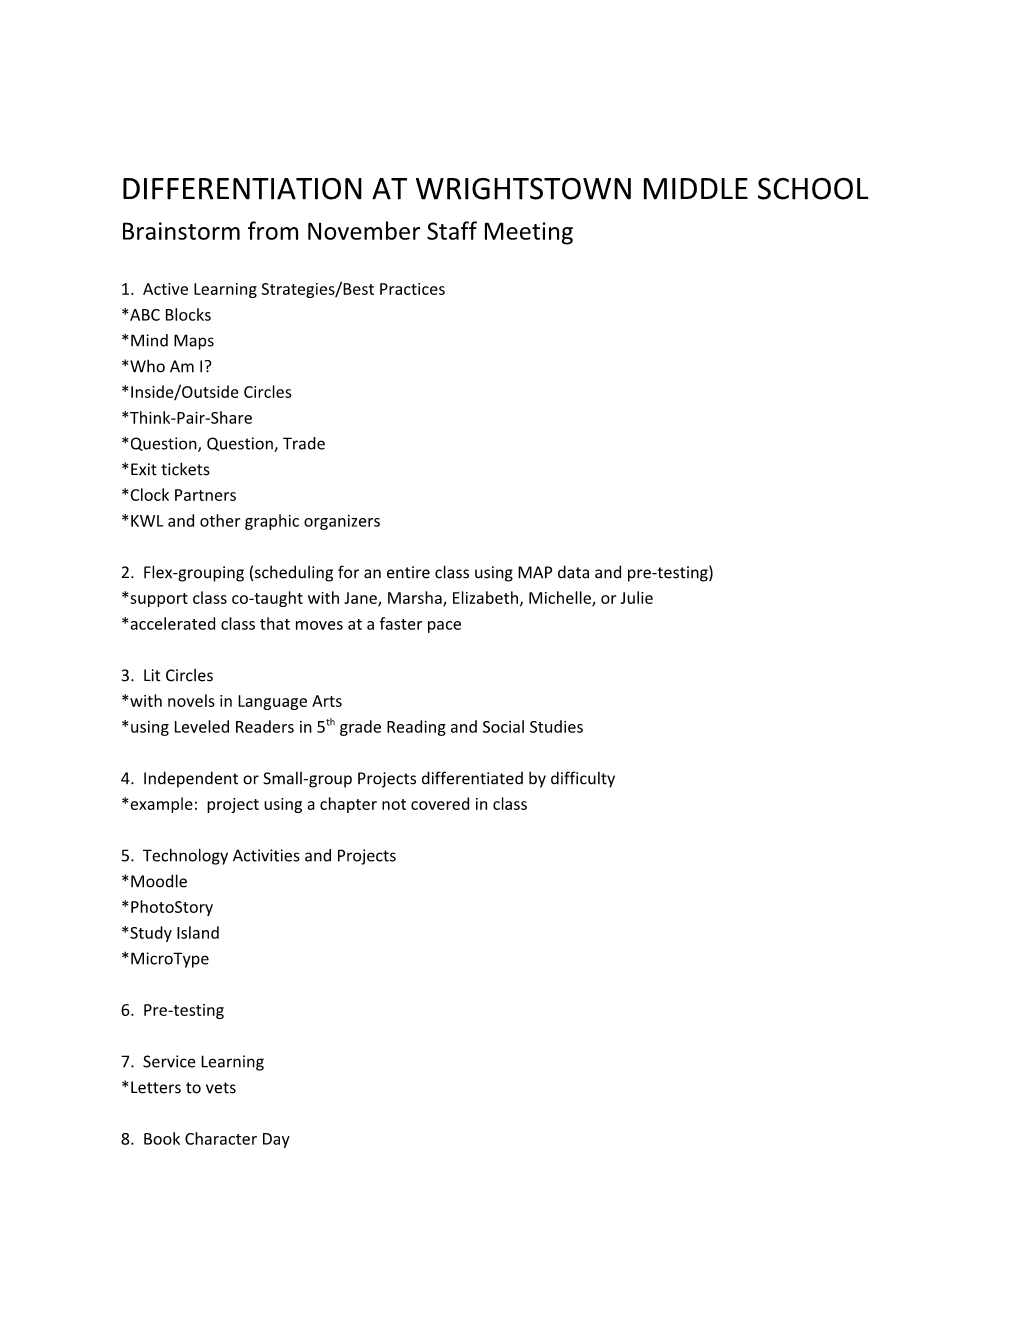 Differentiation at Wrightstown Middle School